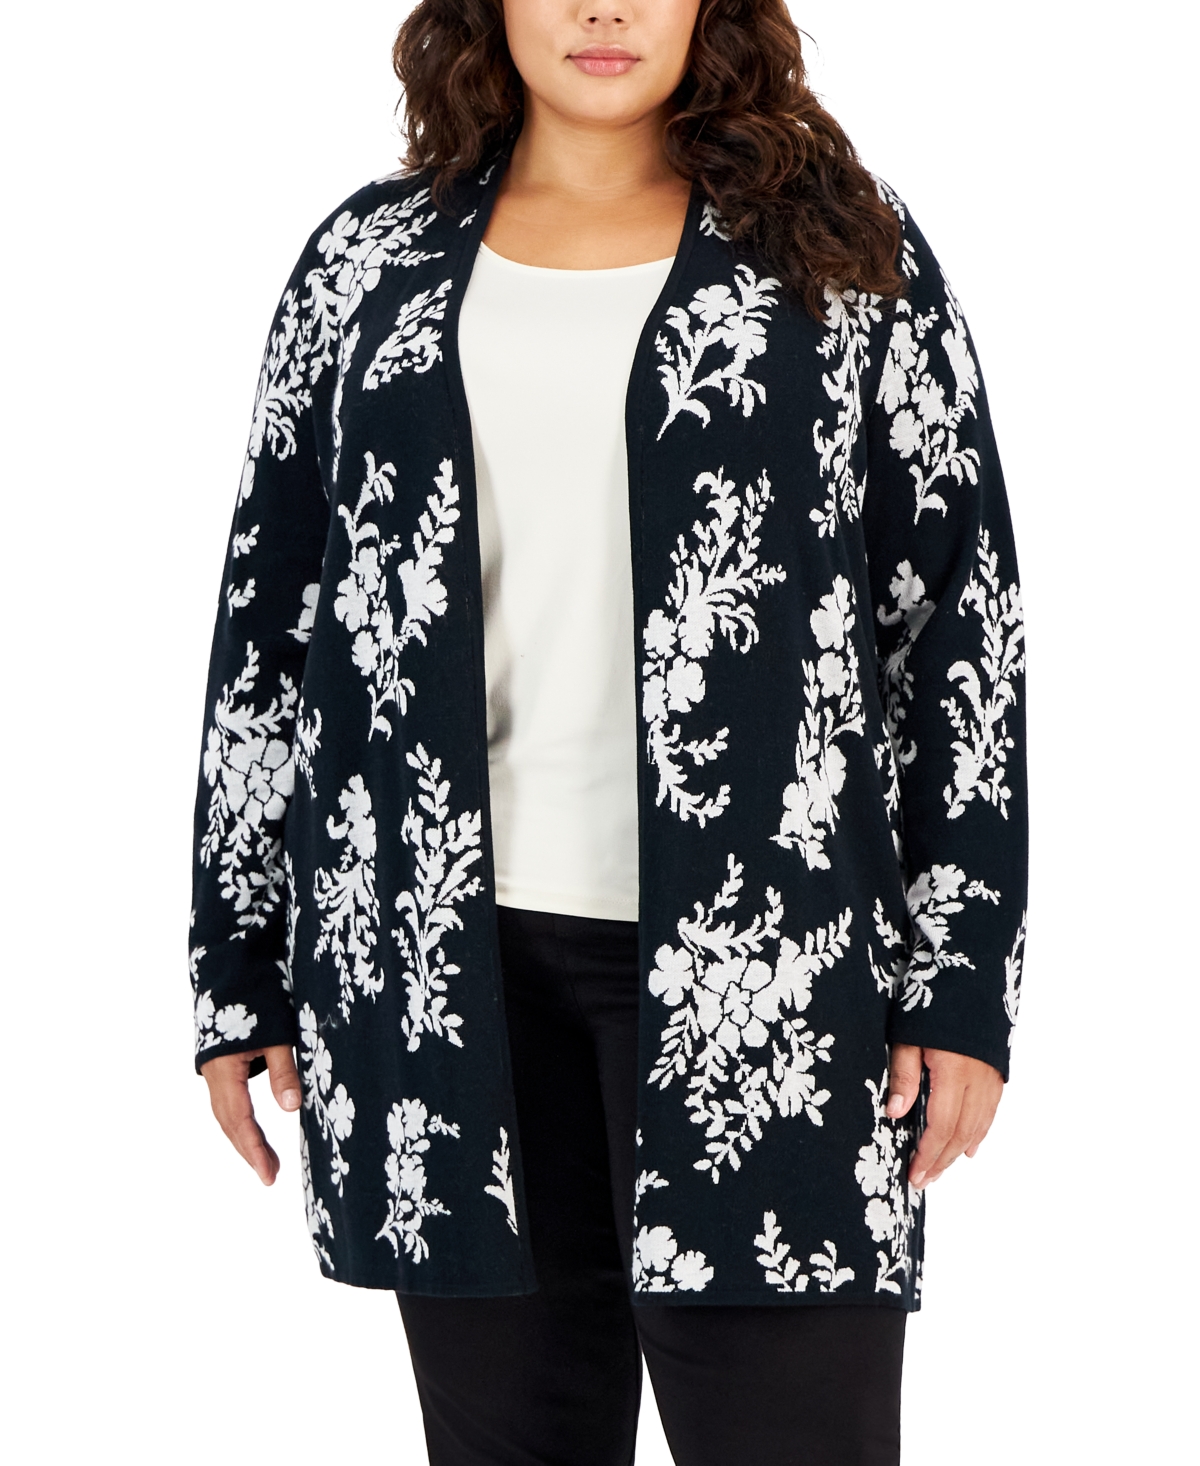 Jm Collection Plus Size Foliage Printed Cardigan Sweater, Created for Macy's